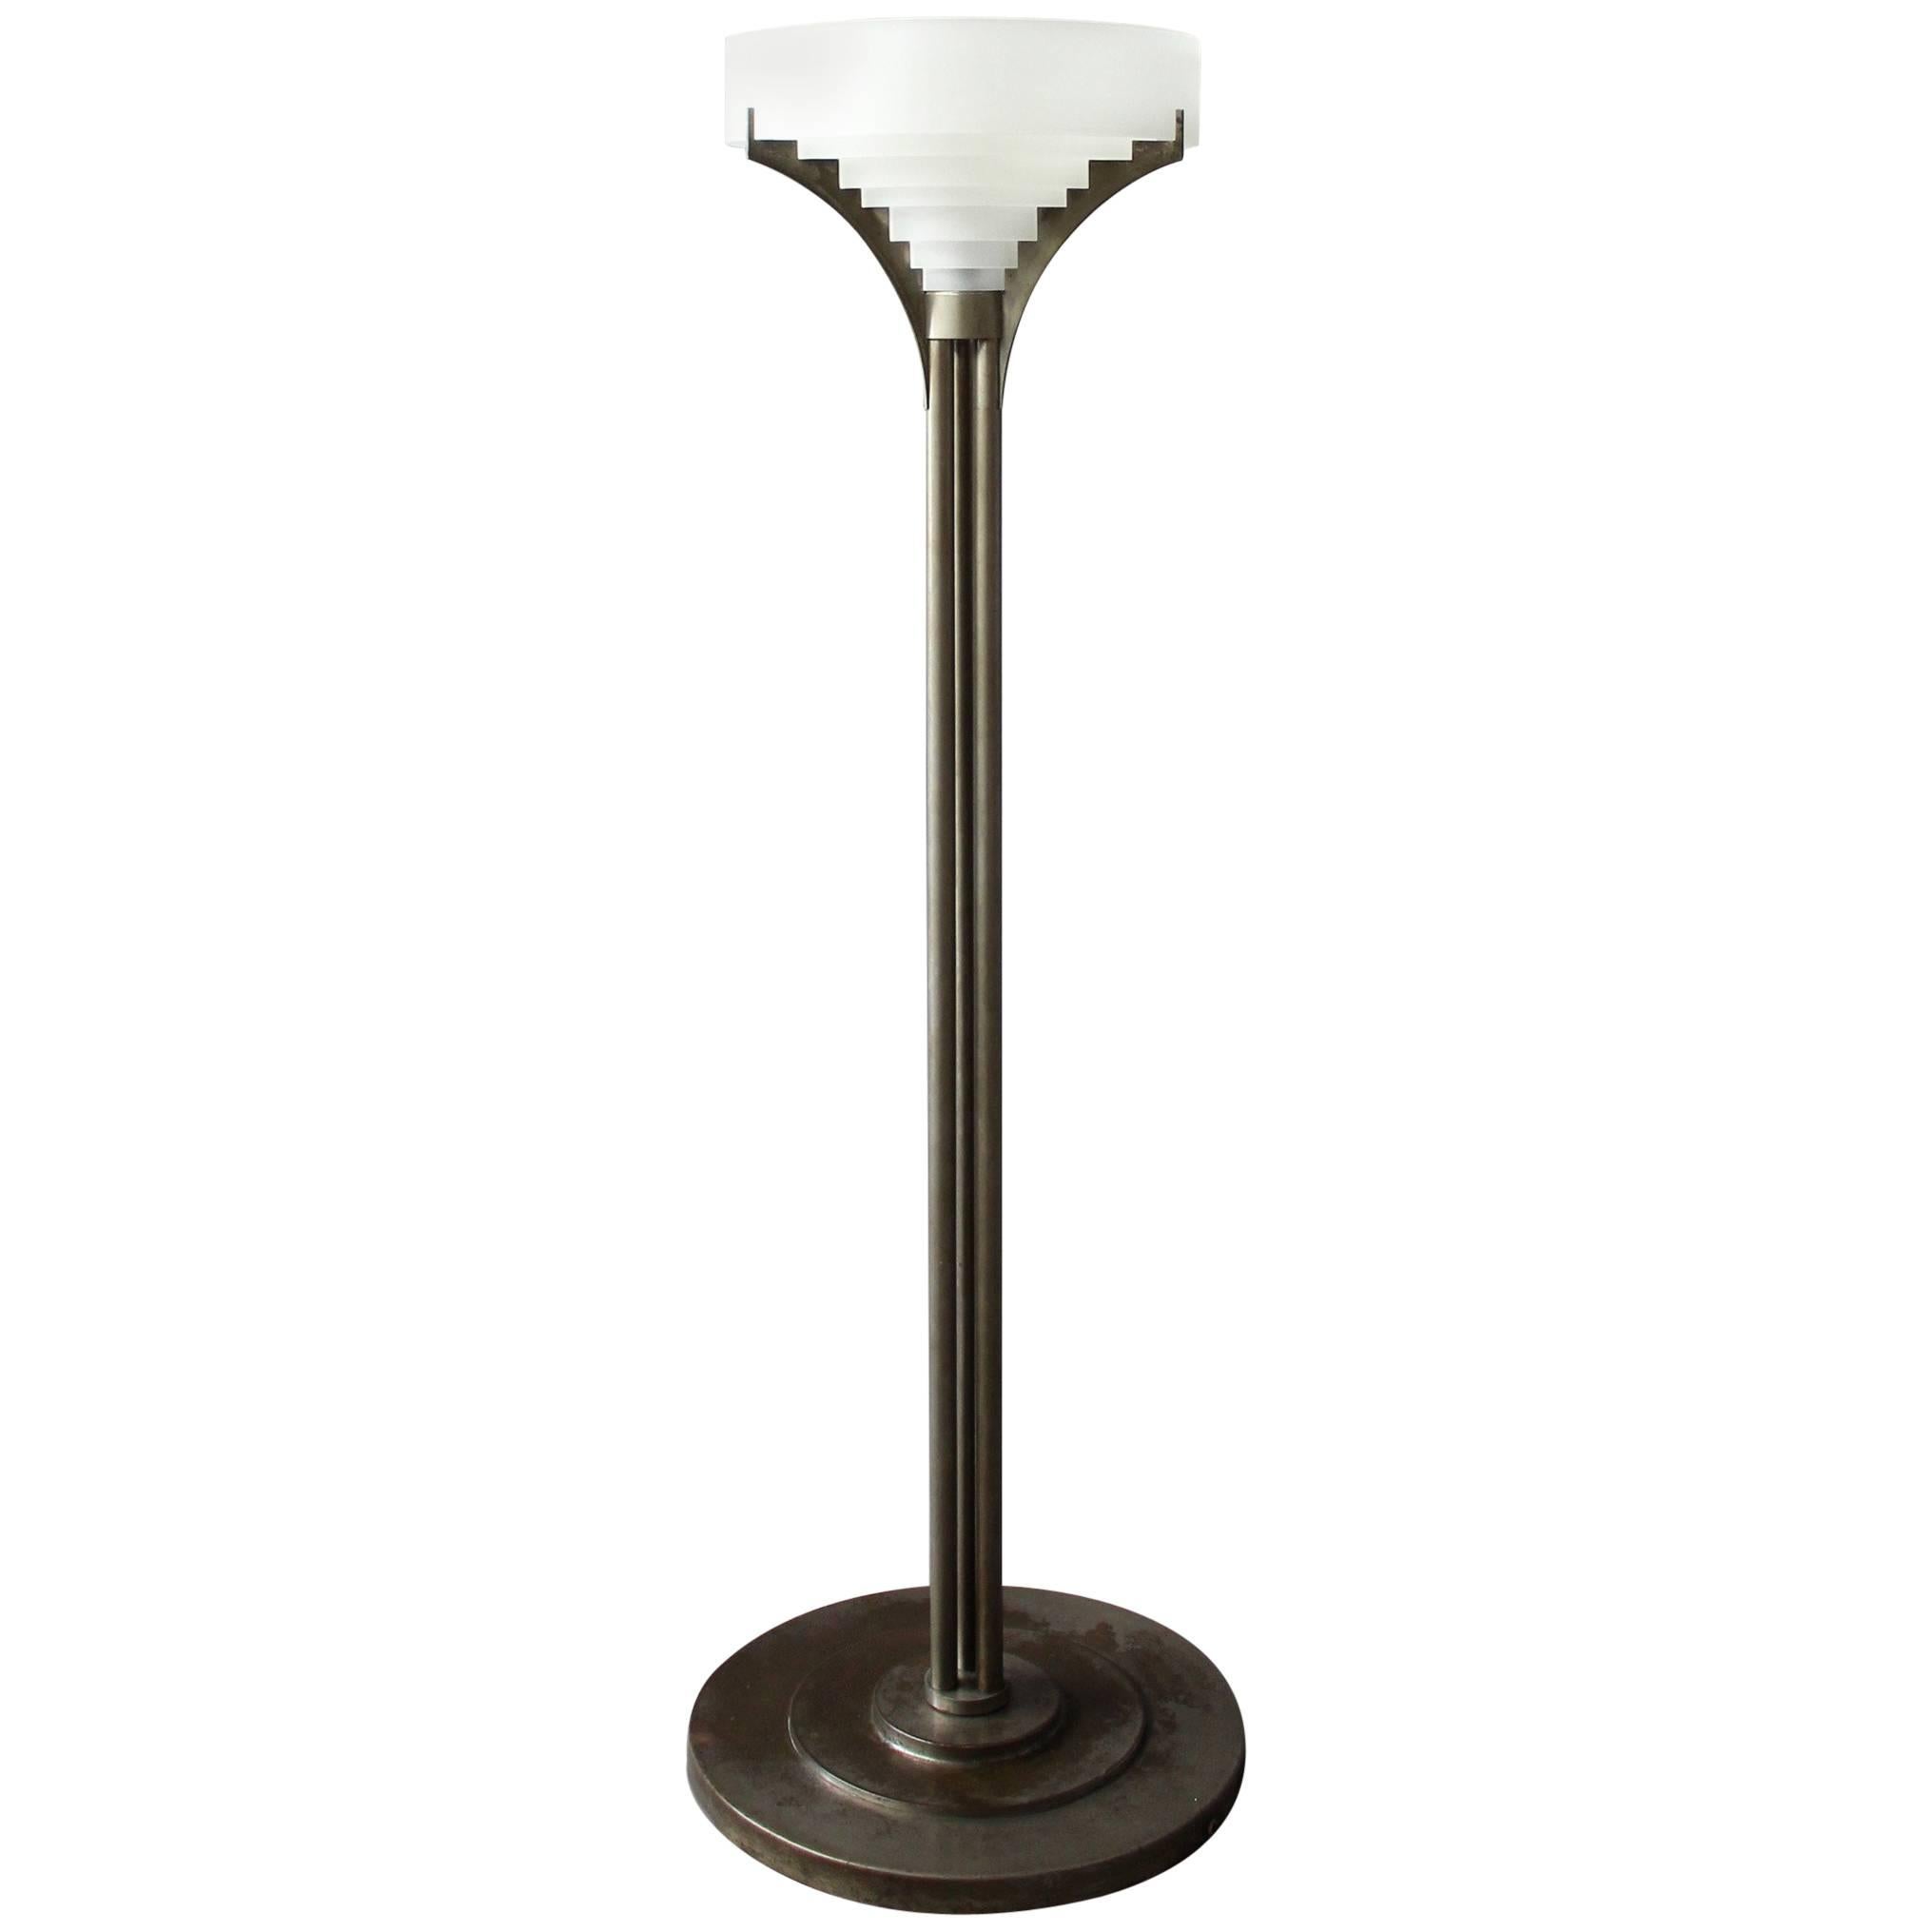 Rare Fine French Art Deco Chrome and Glass Floor Lamp by Jean Perzel For Sale